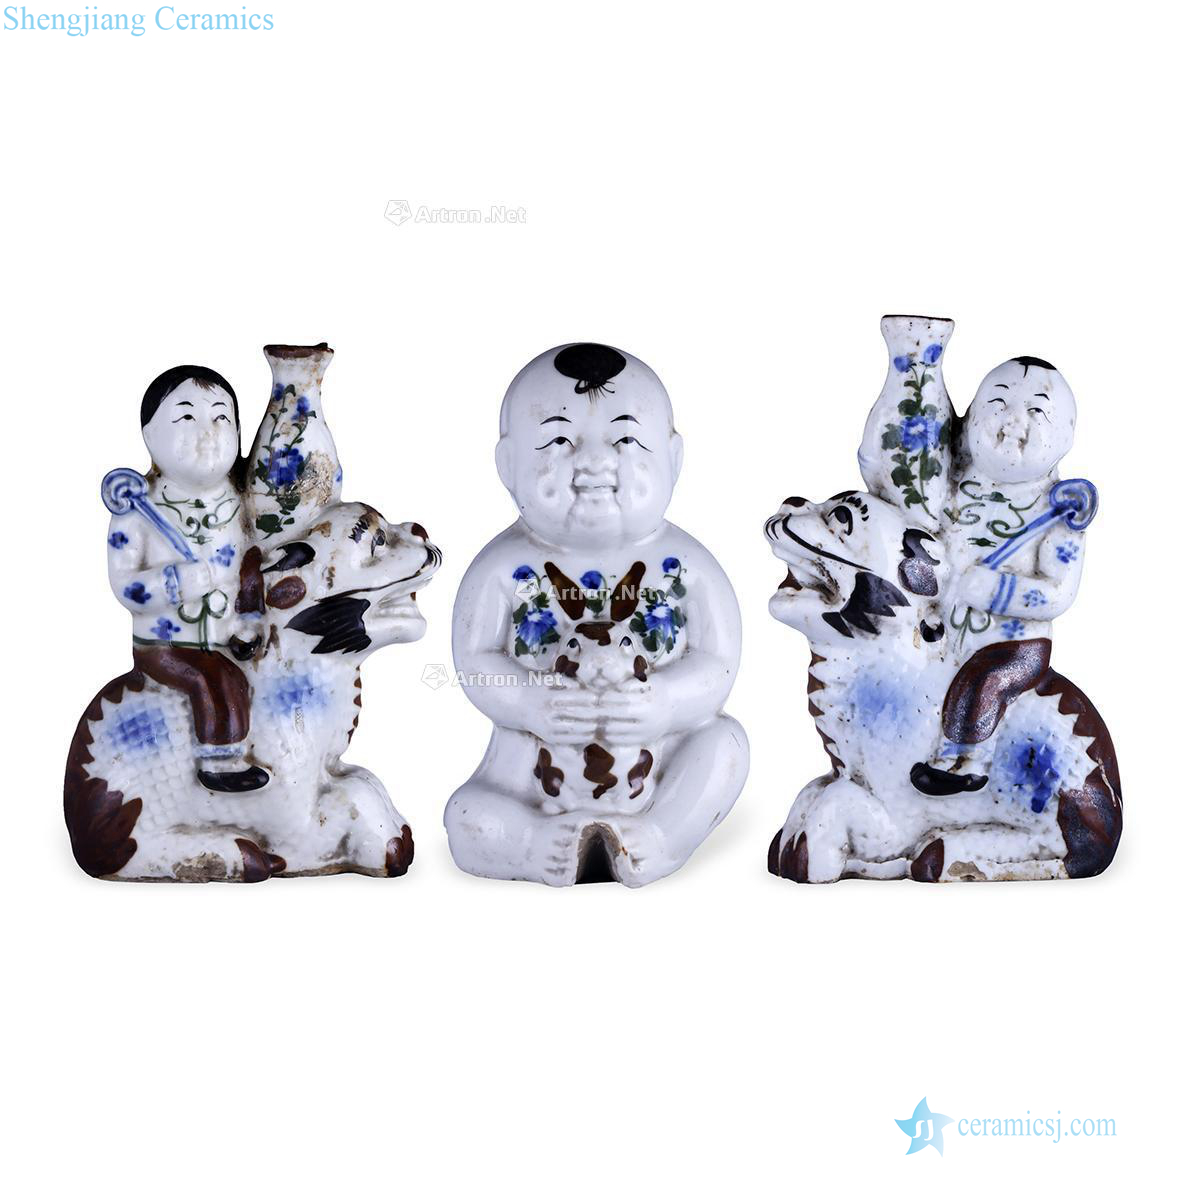 In late qing dynasty Under glaze color porcelain doll (group a)